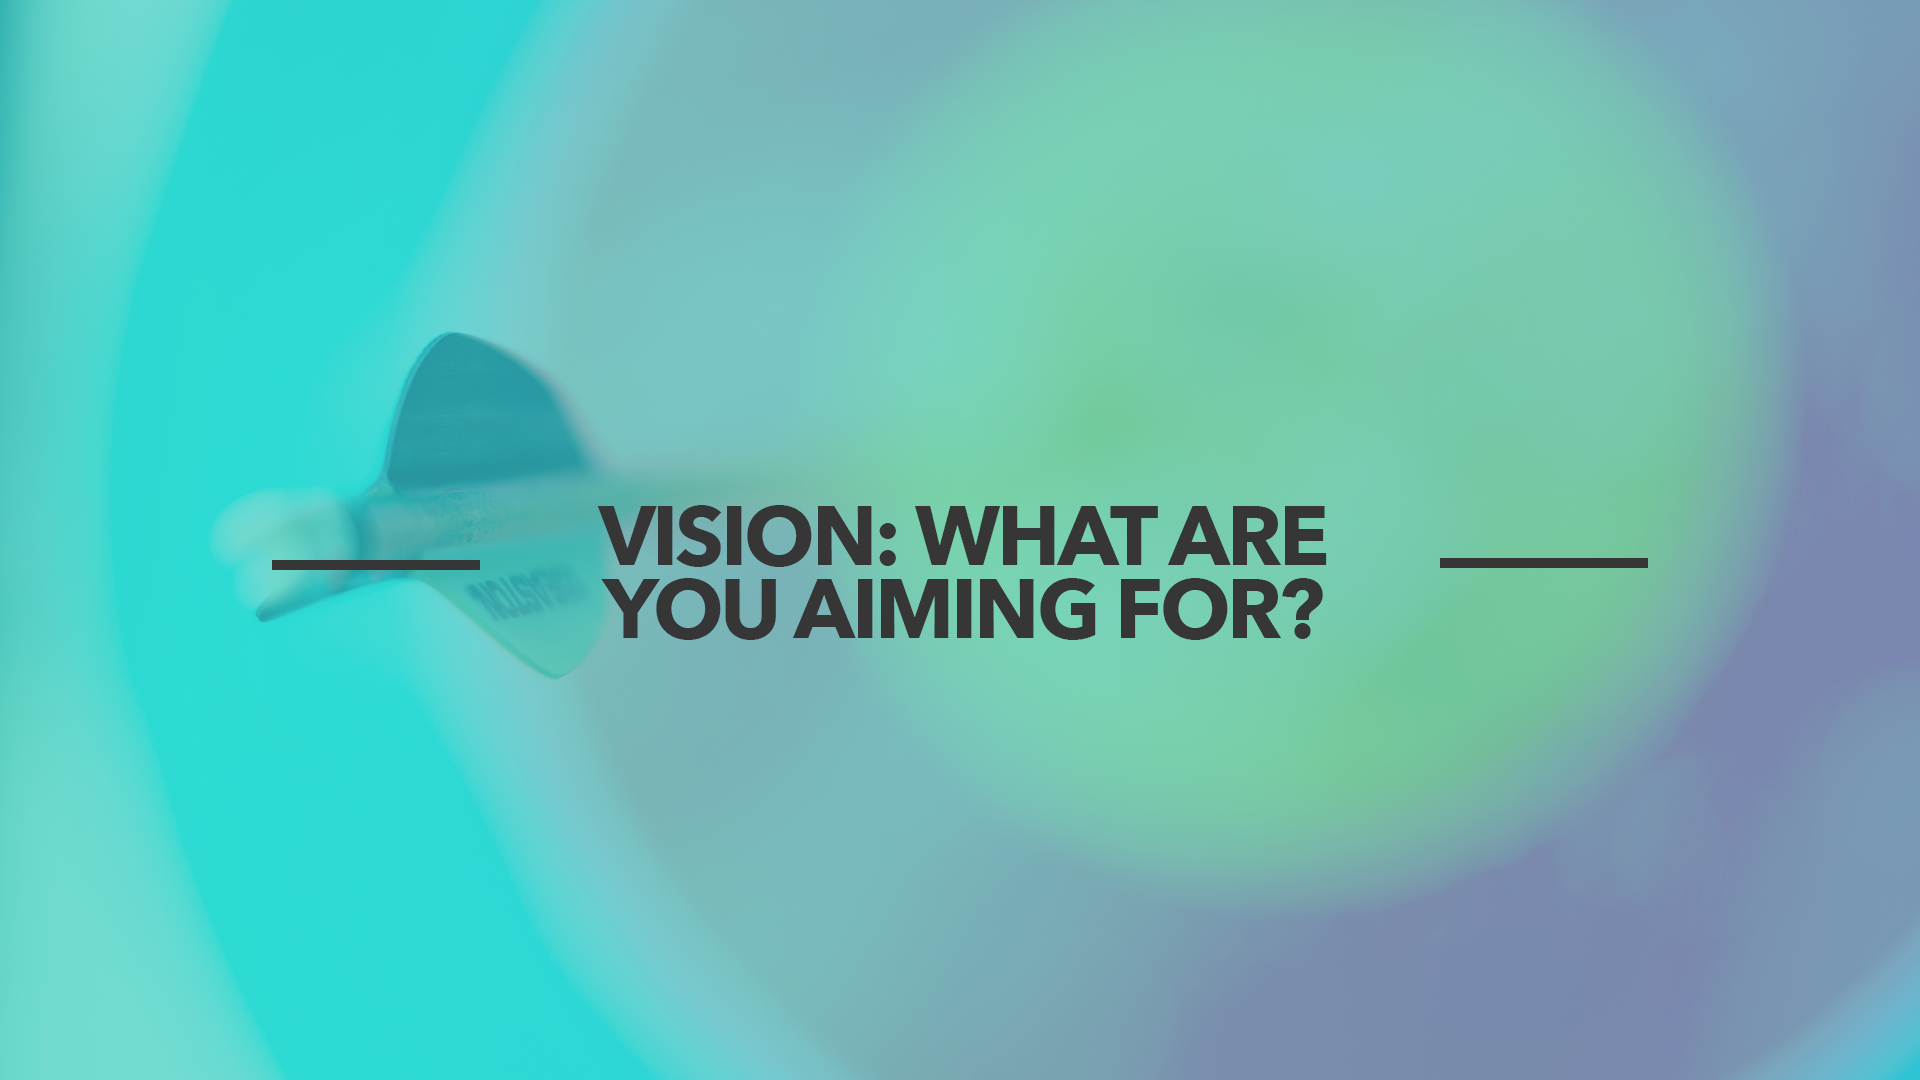 Vision: What are you aiming for?